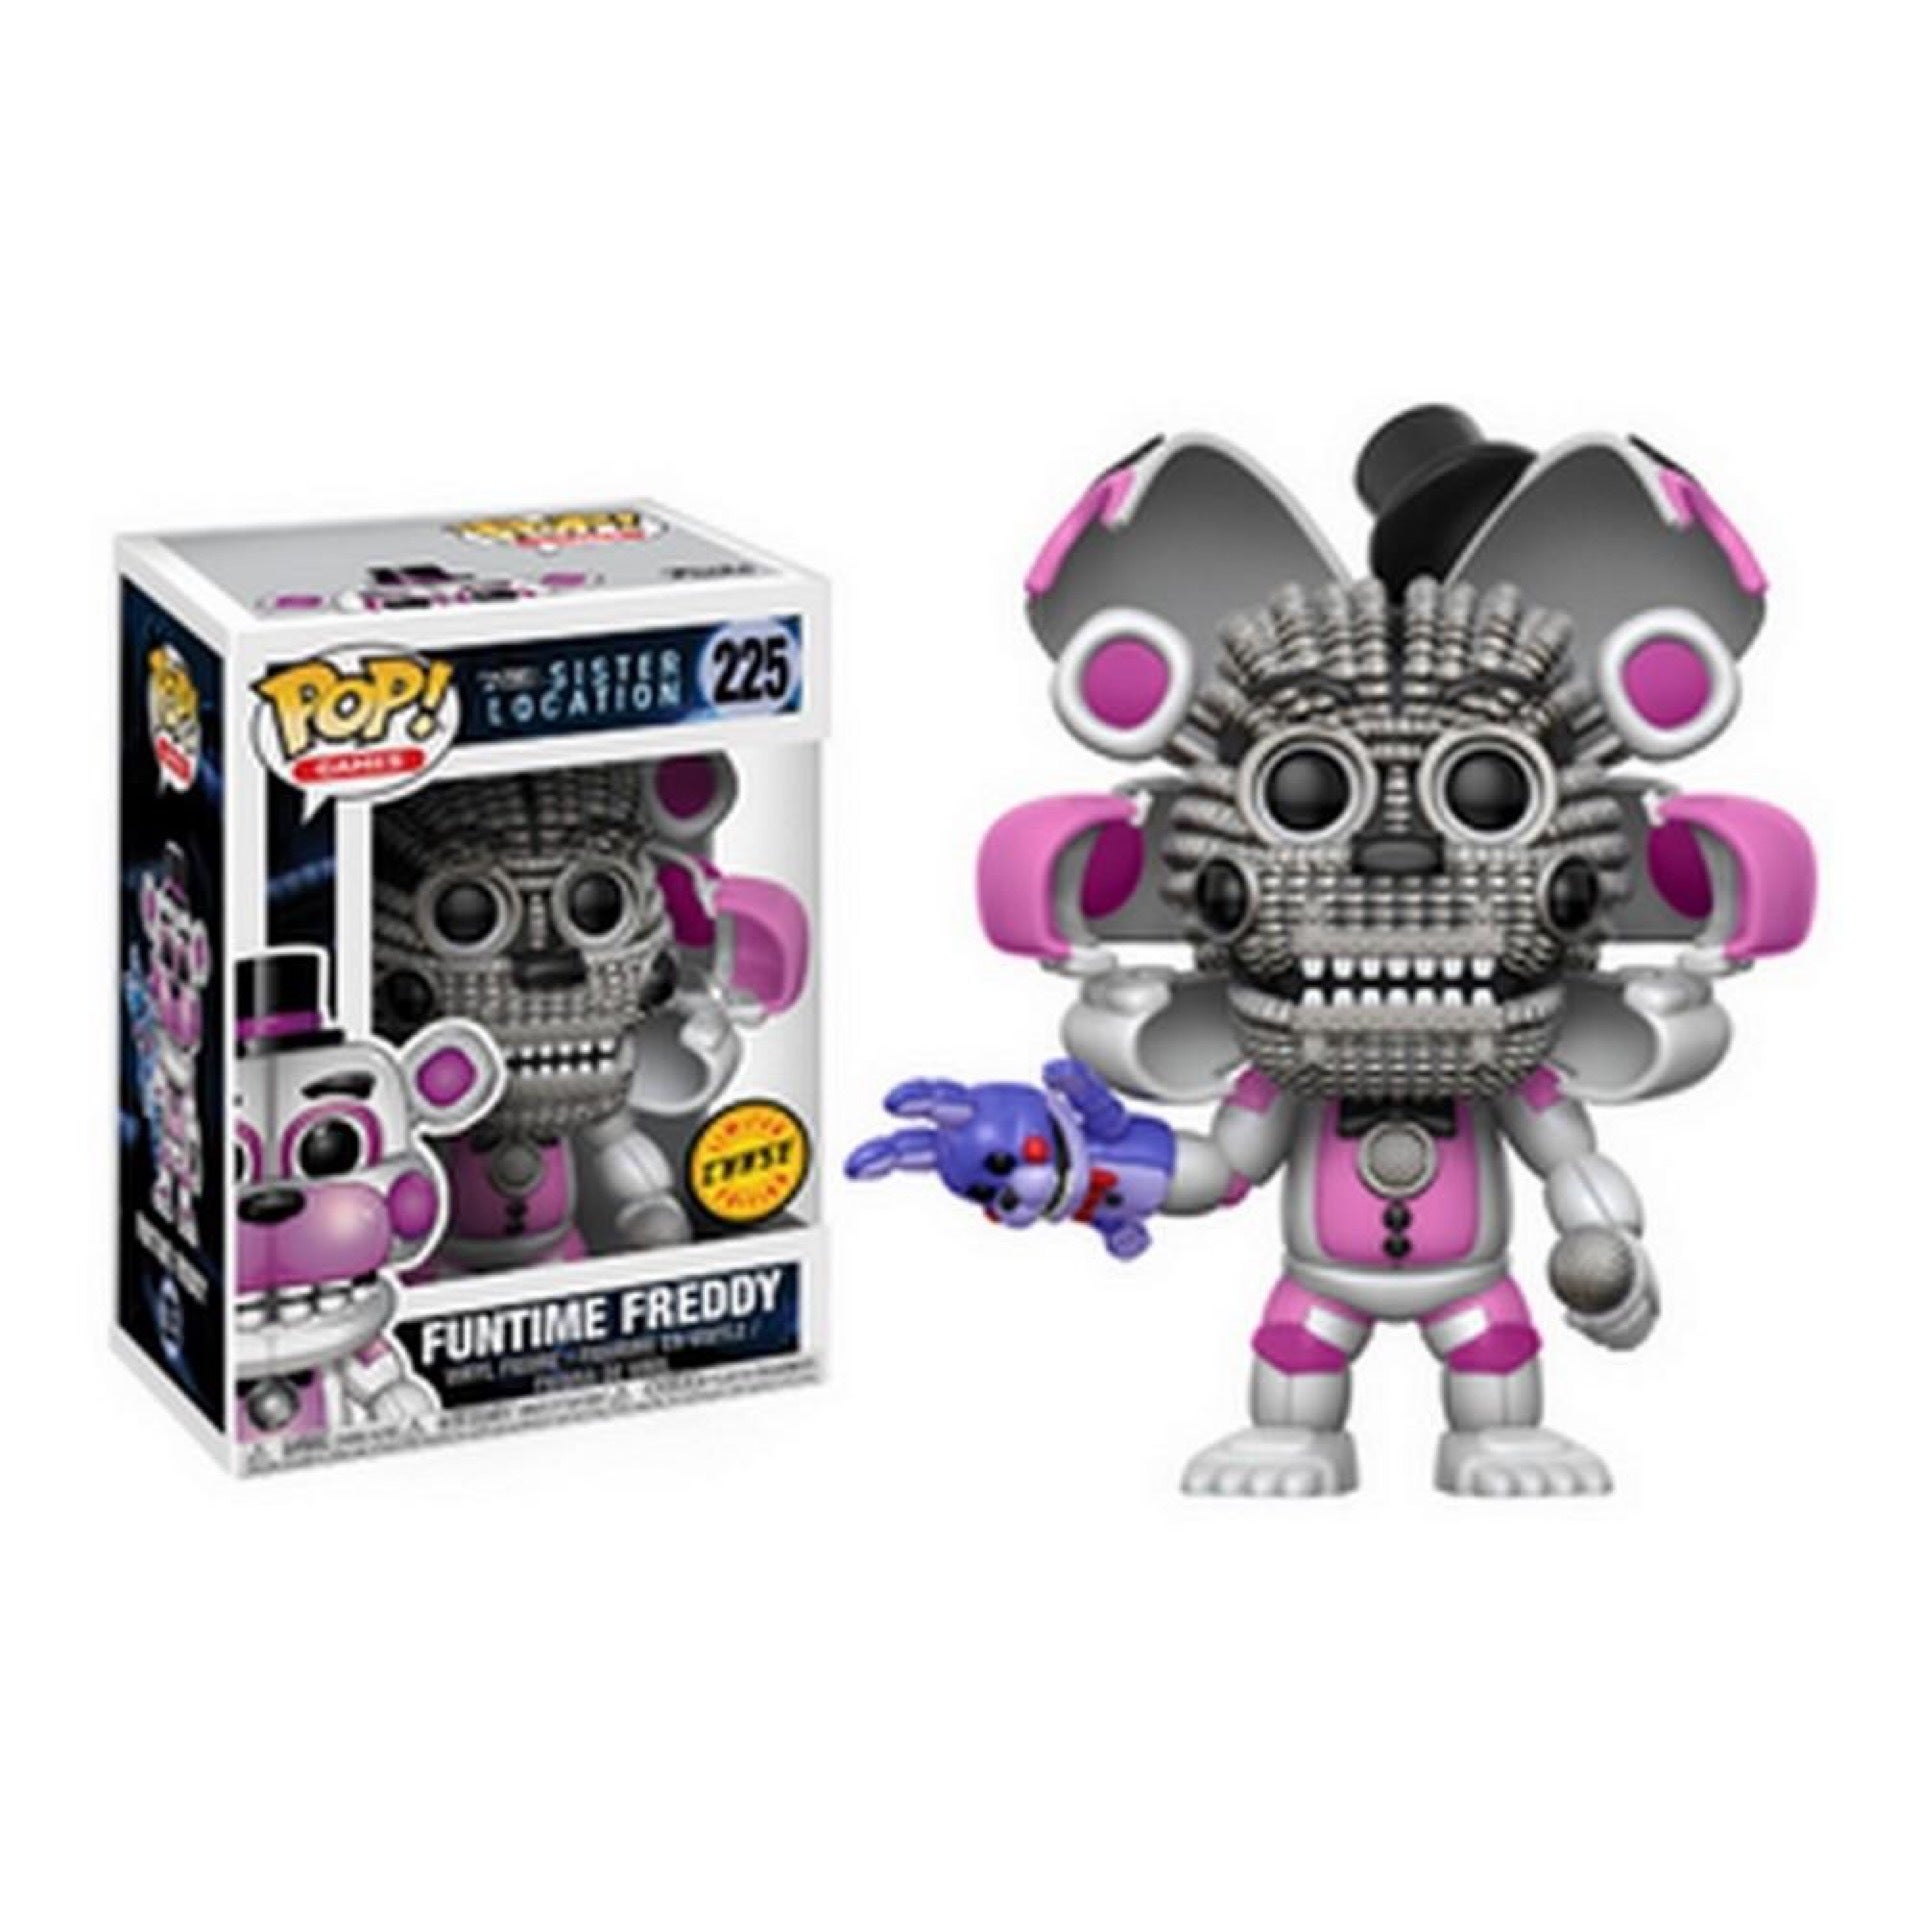 FNAF 5 Funko Funtime Foxy Action Figure Five Nights at Freddy's